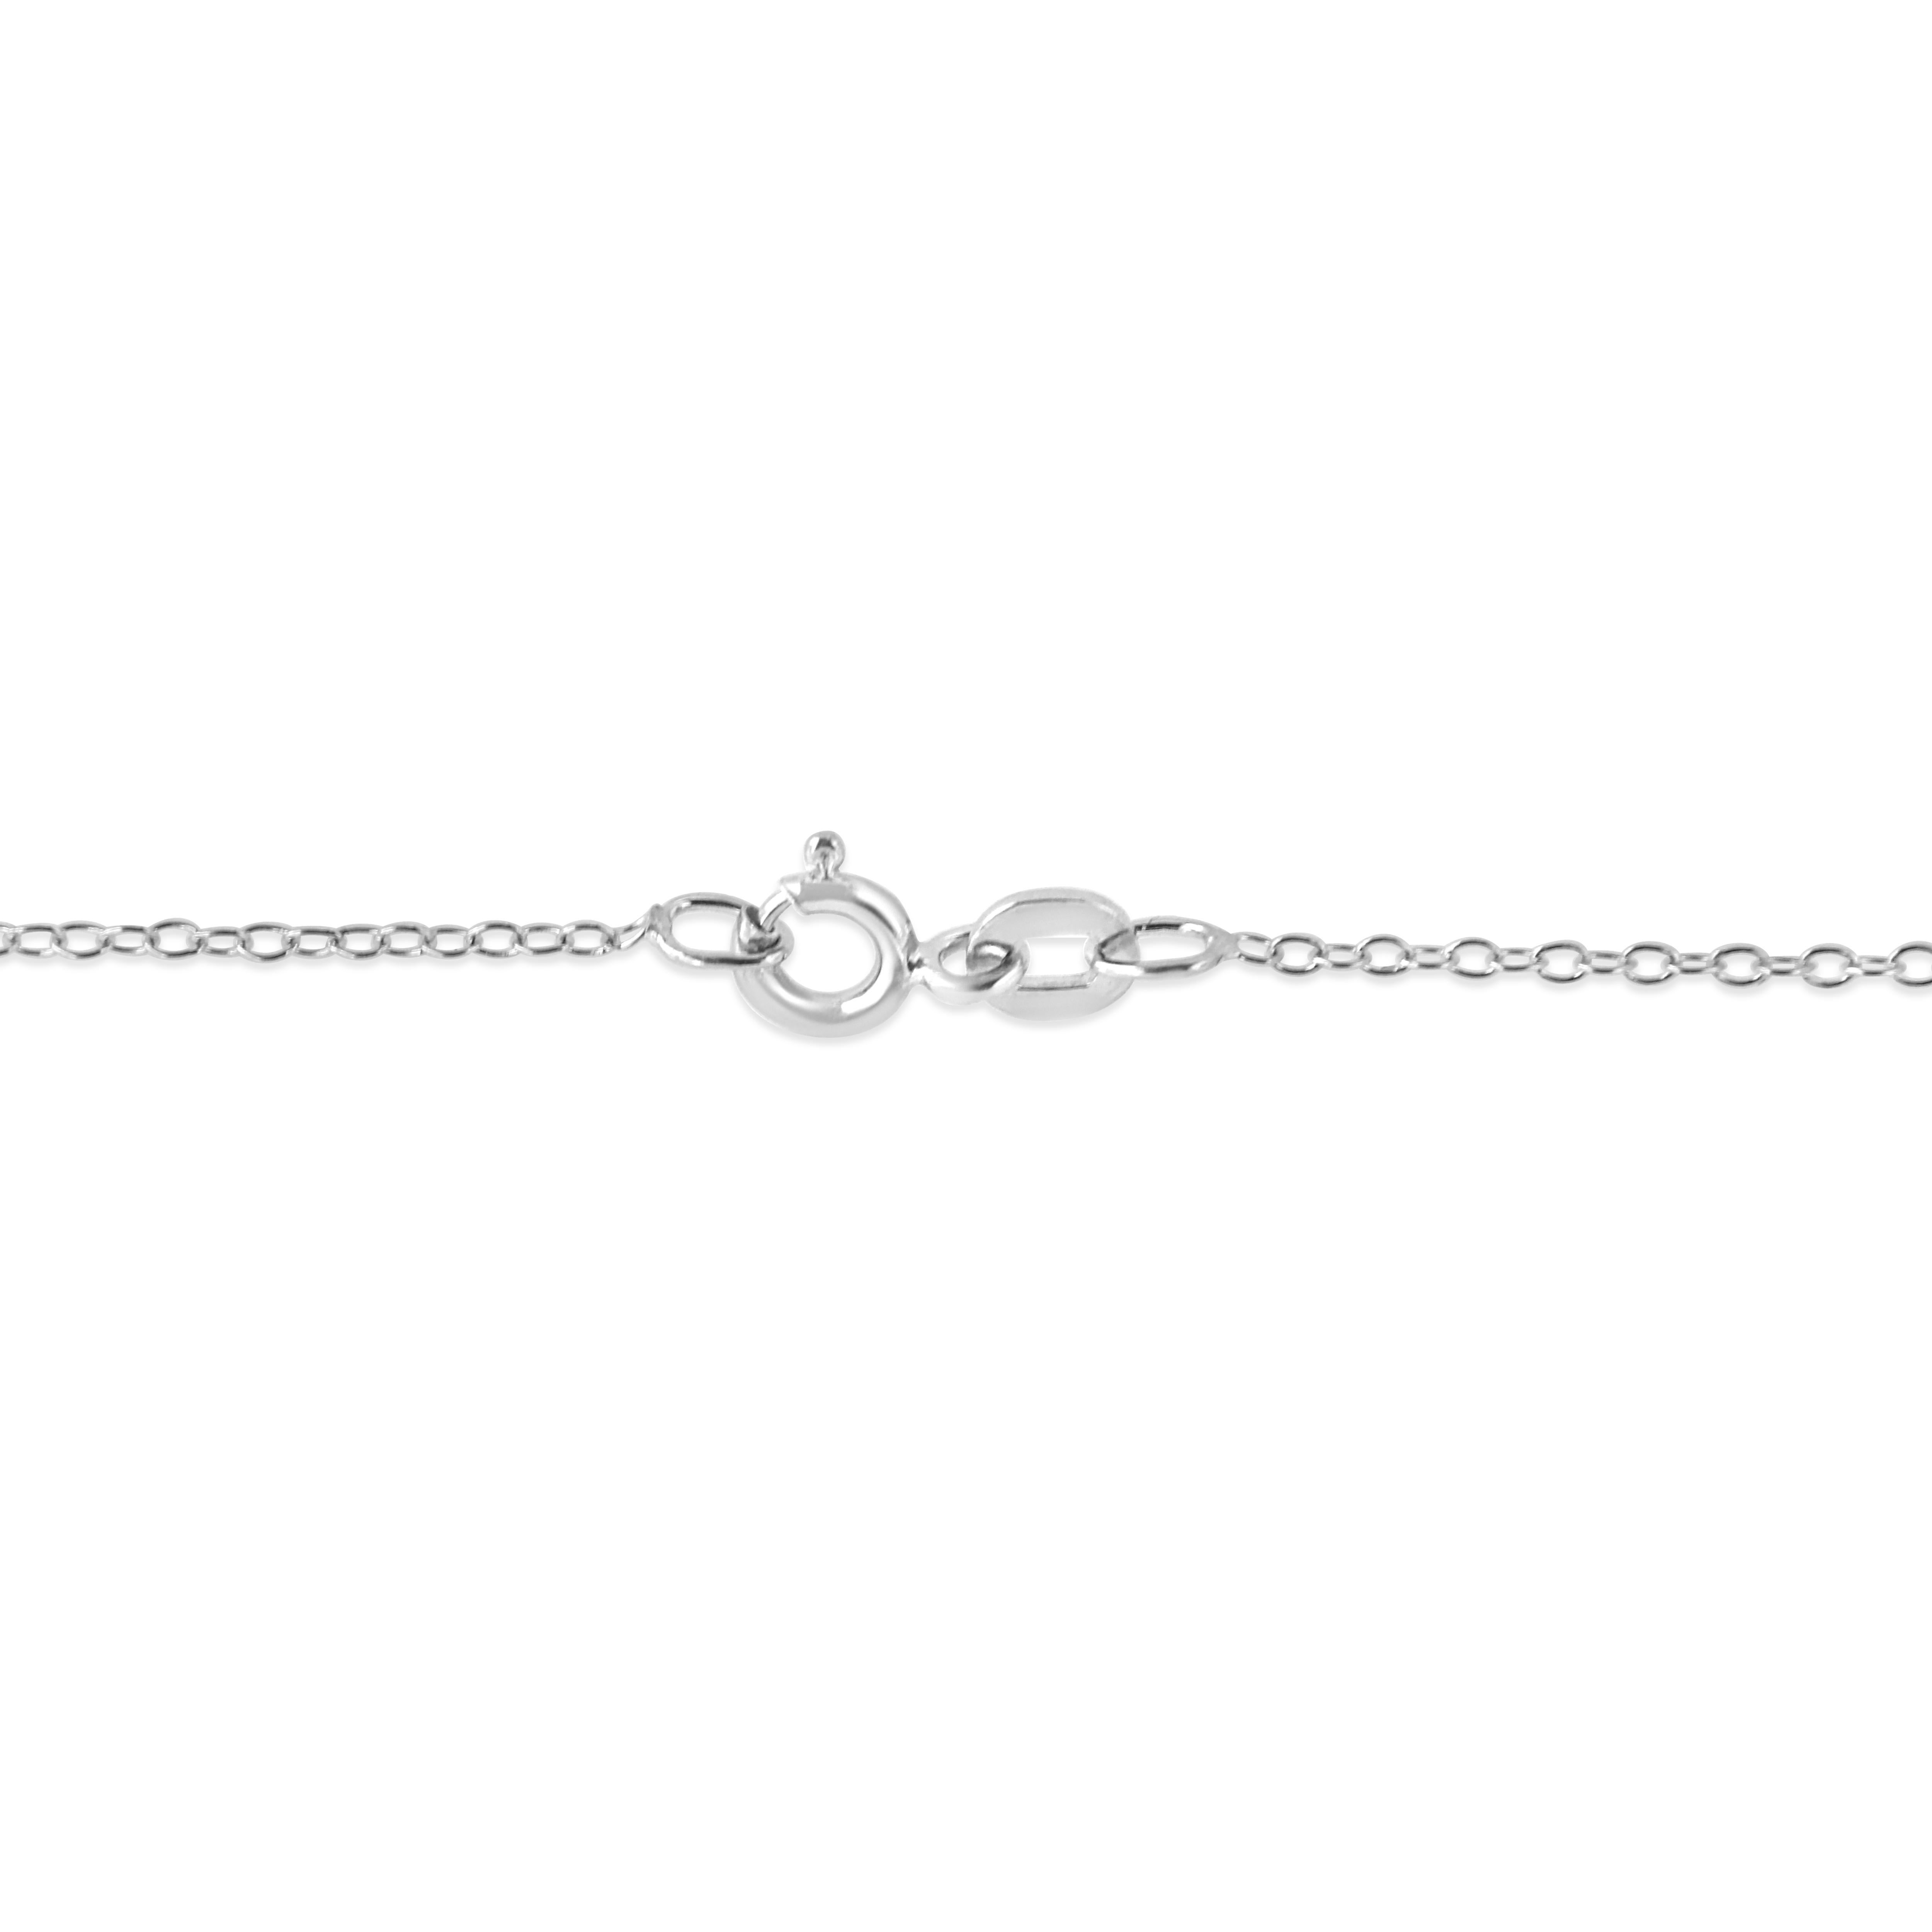 Show her just how much you love her with this sweet sterling silver, 1/6 carat total weight diamond pendant necklace. The heart shaped pendant contains the word “love” inside it with diamond embellishments. The necklace makes a great gift for